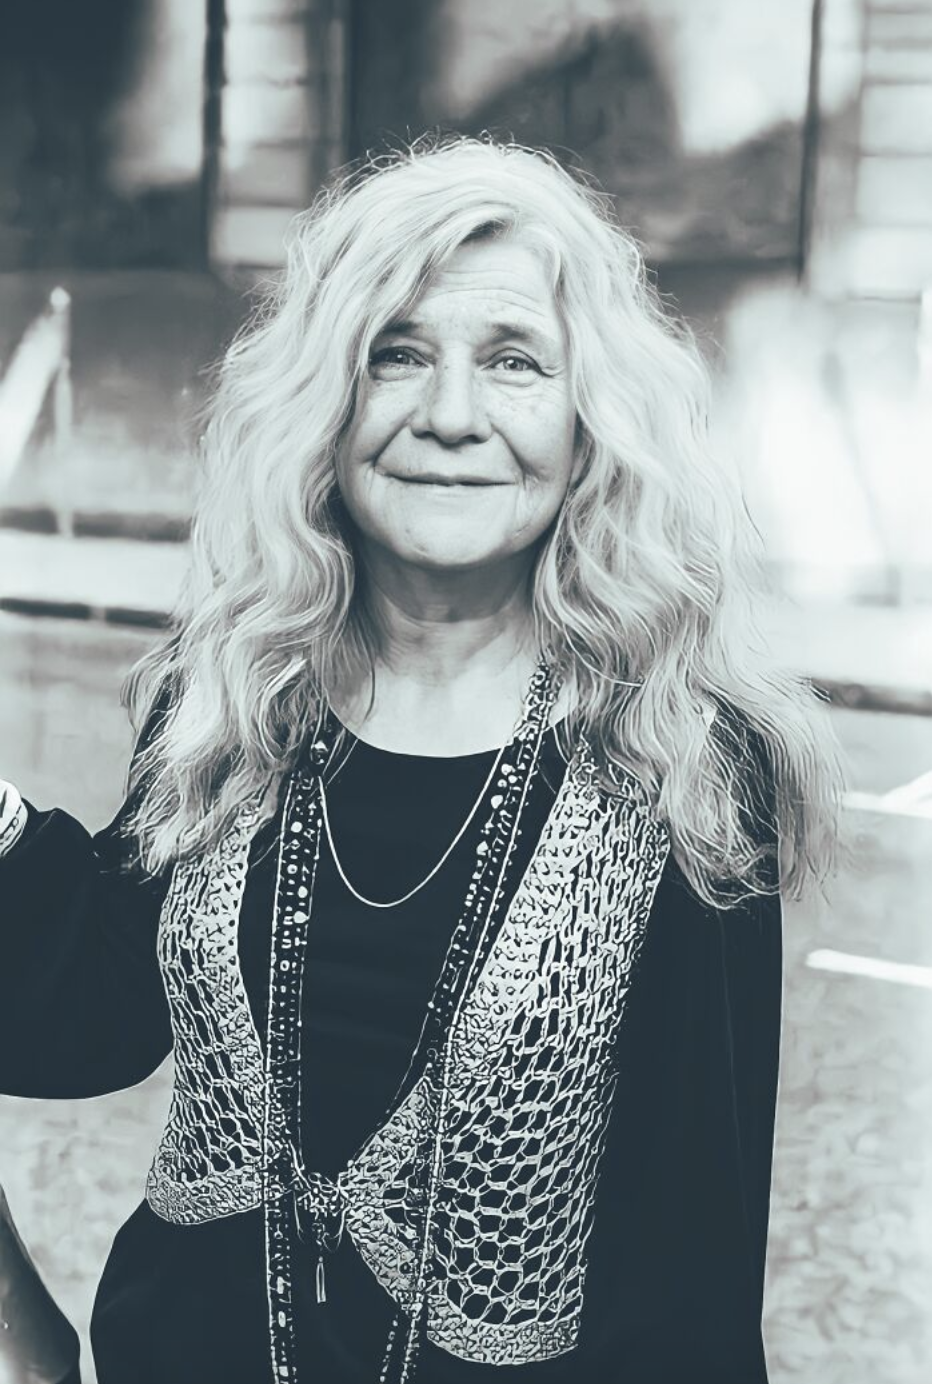 black and white photo of Joplin smiling if she were alive today